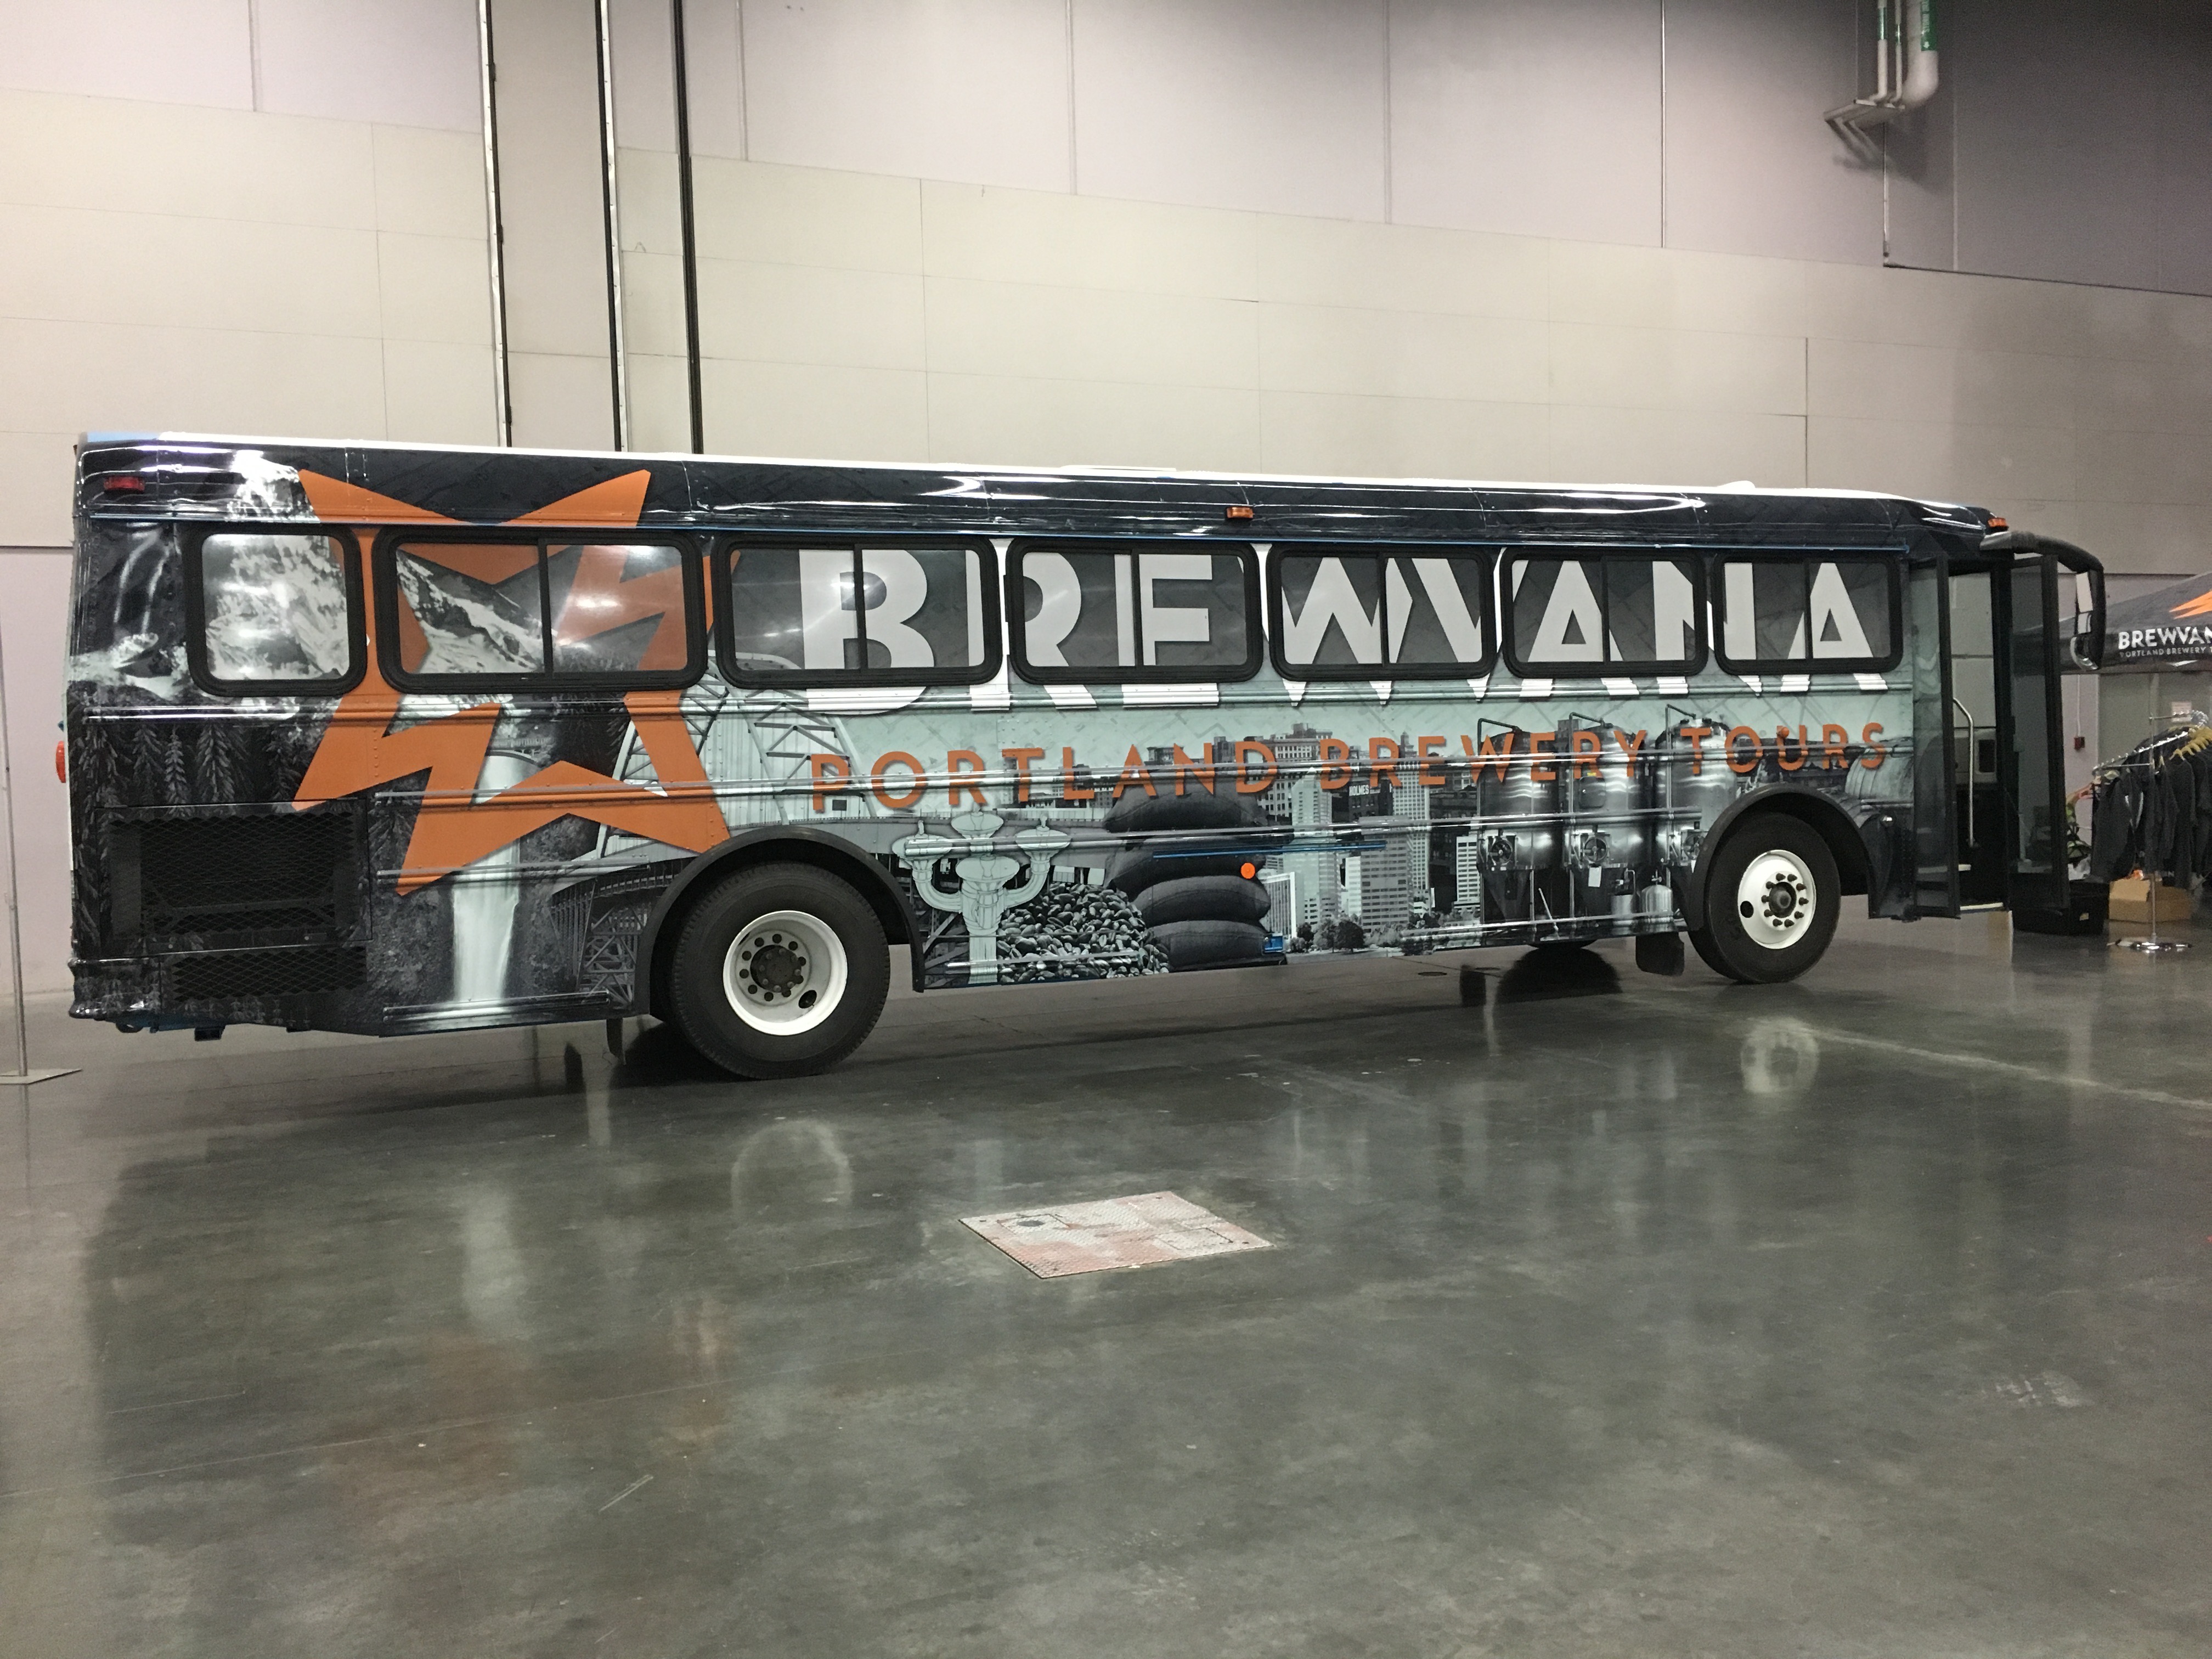 Pam the new 'long bus' from BREWVANA.